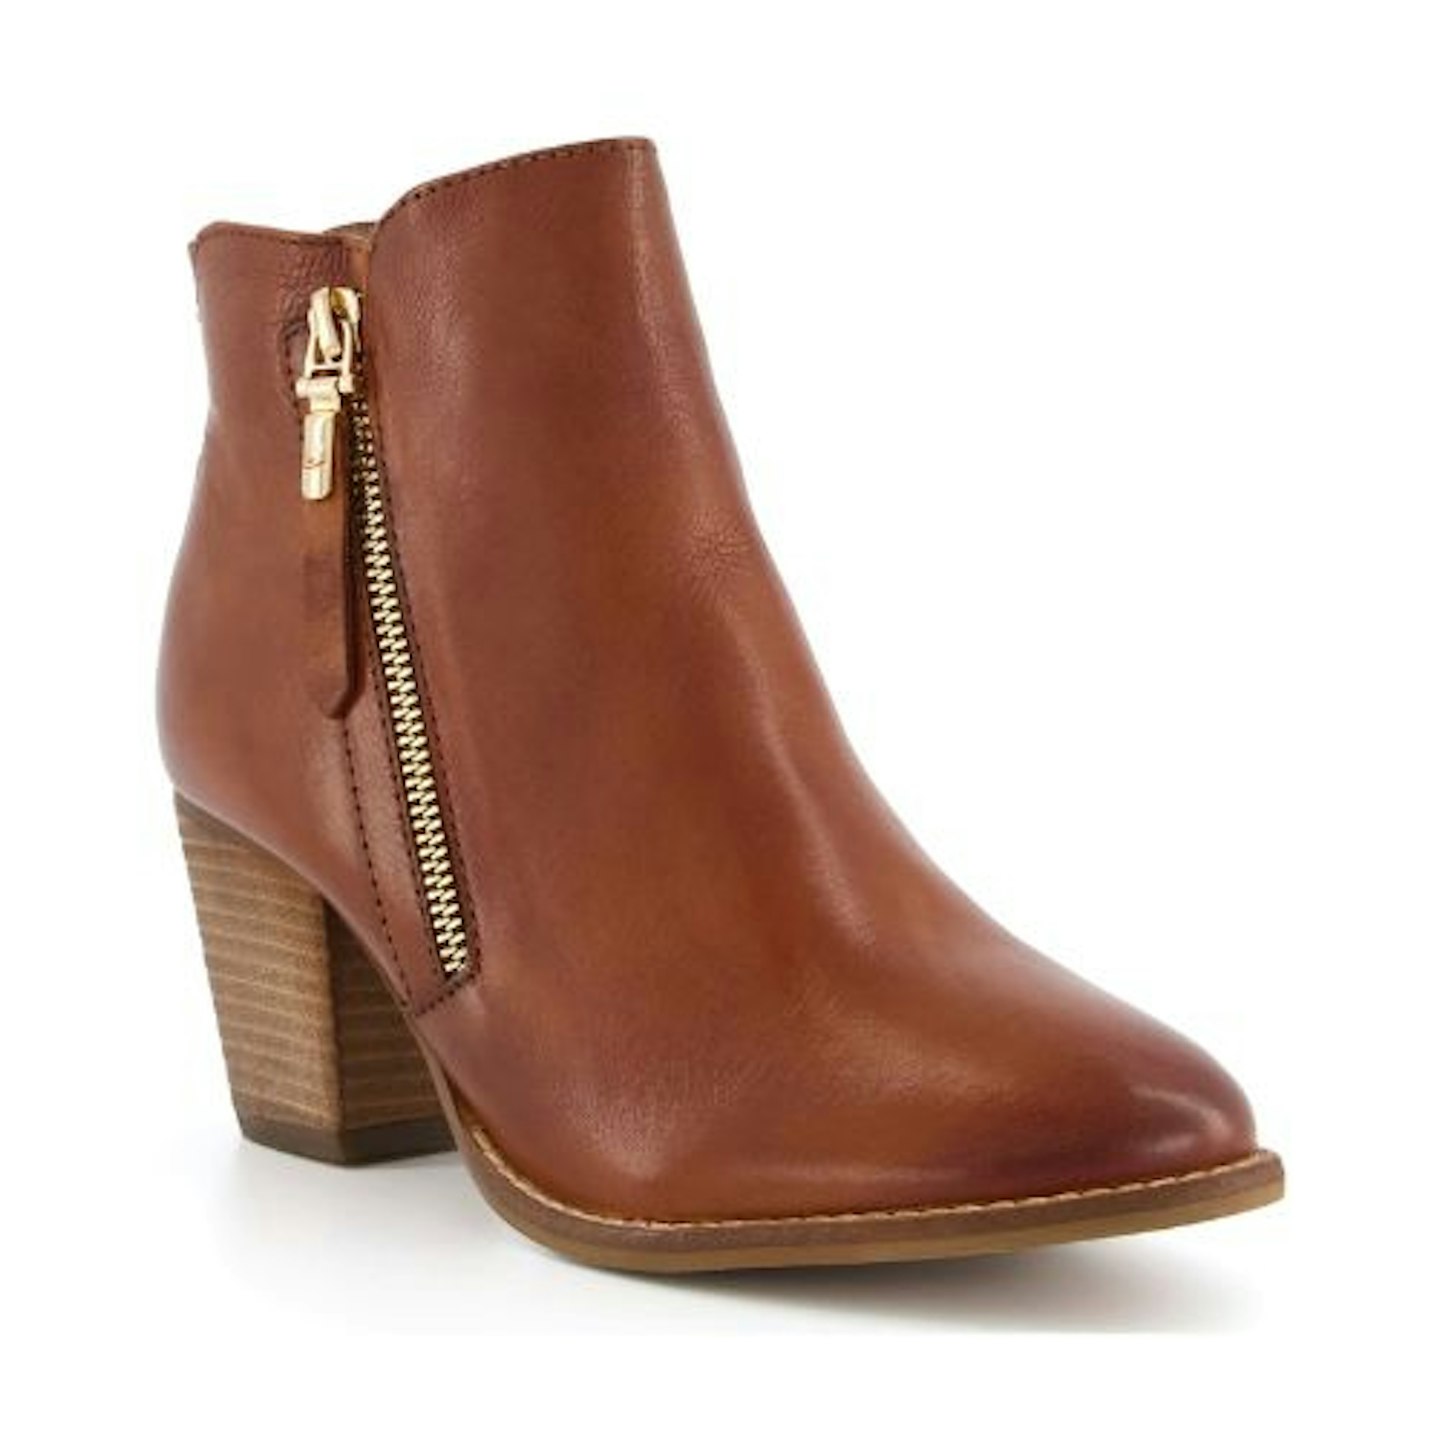 Dune Leather Block Heel Ankle Boots